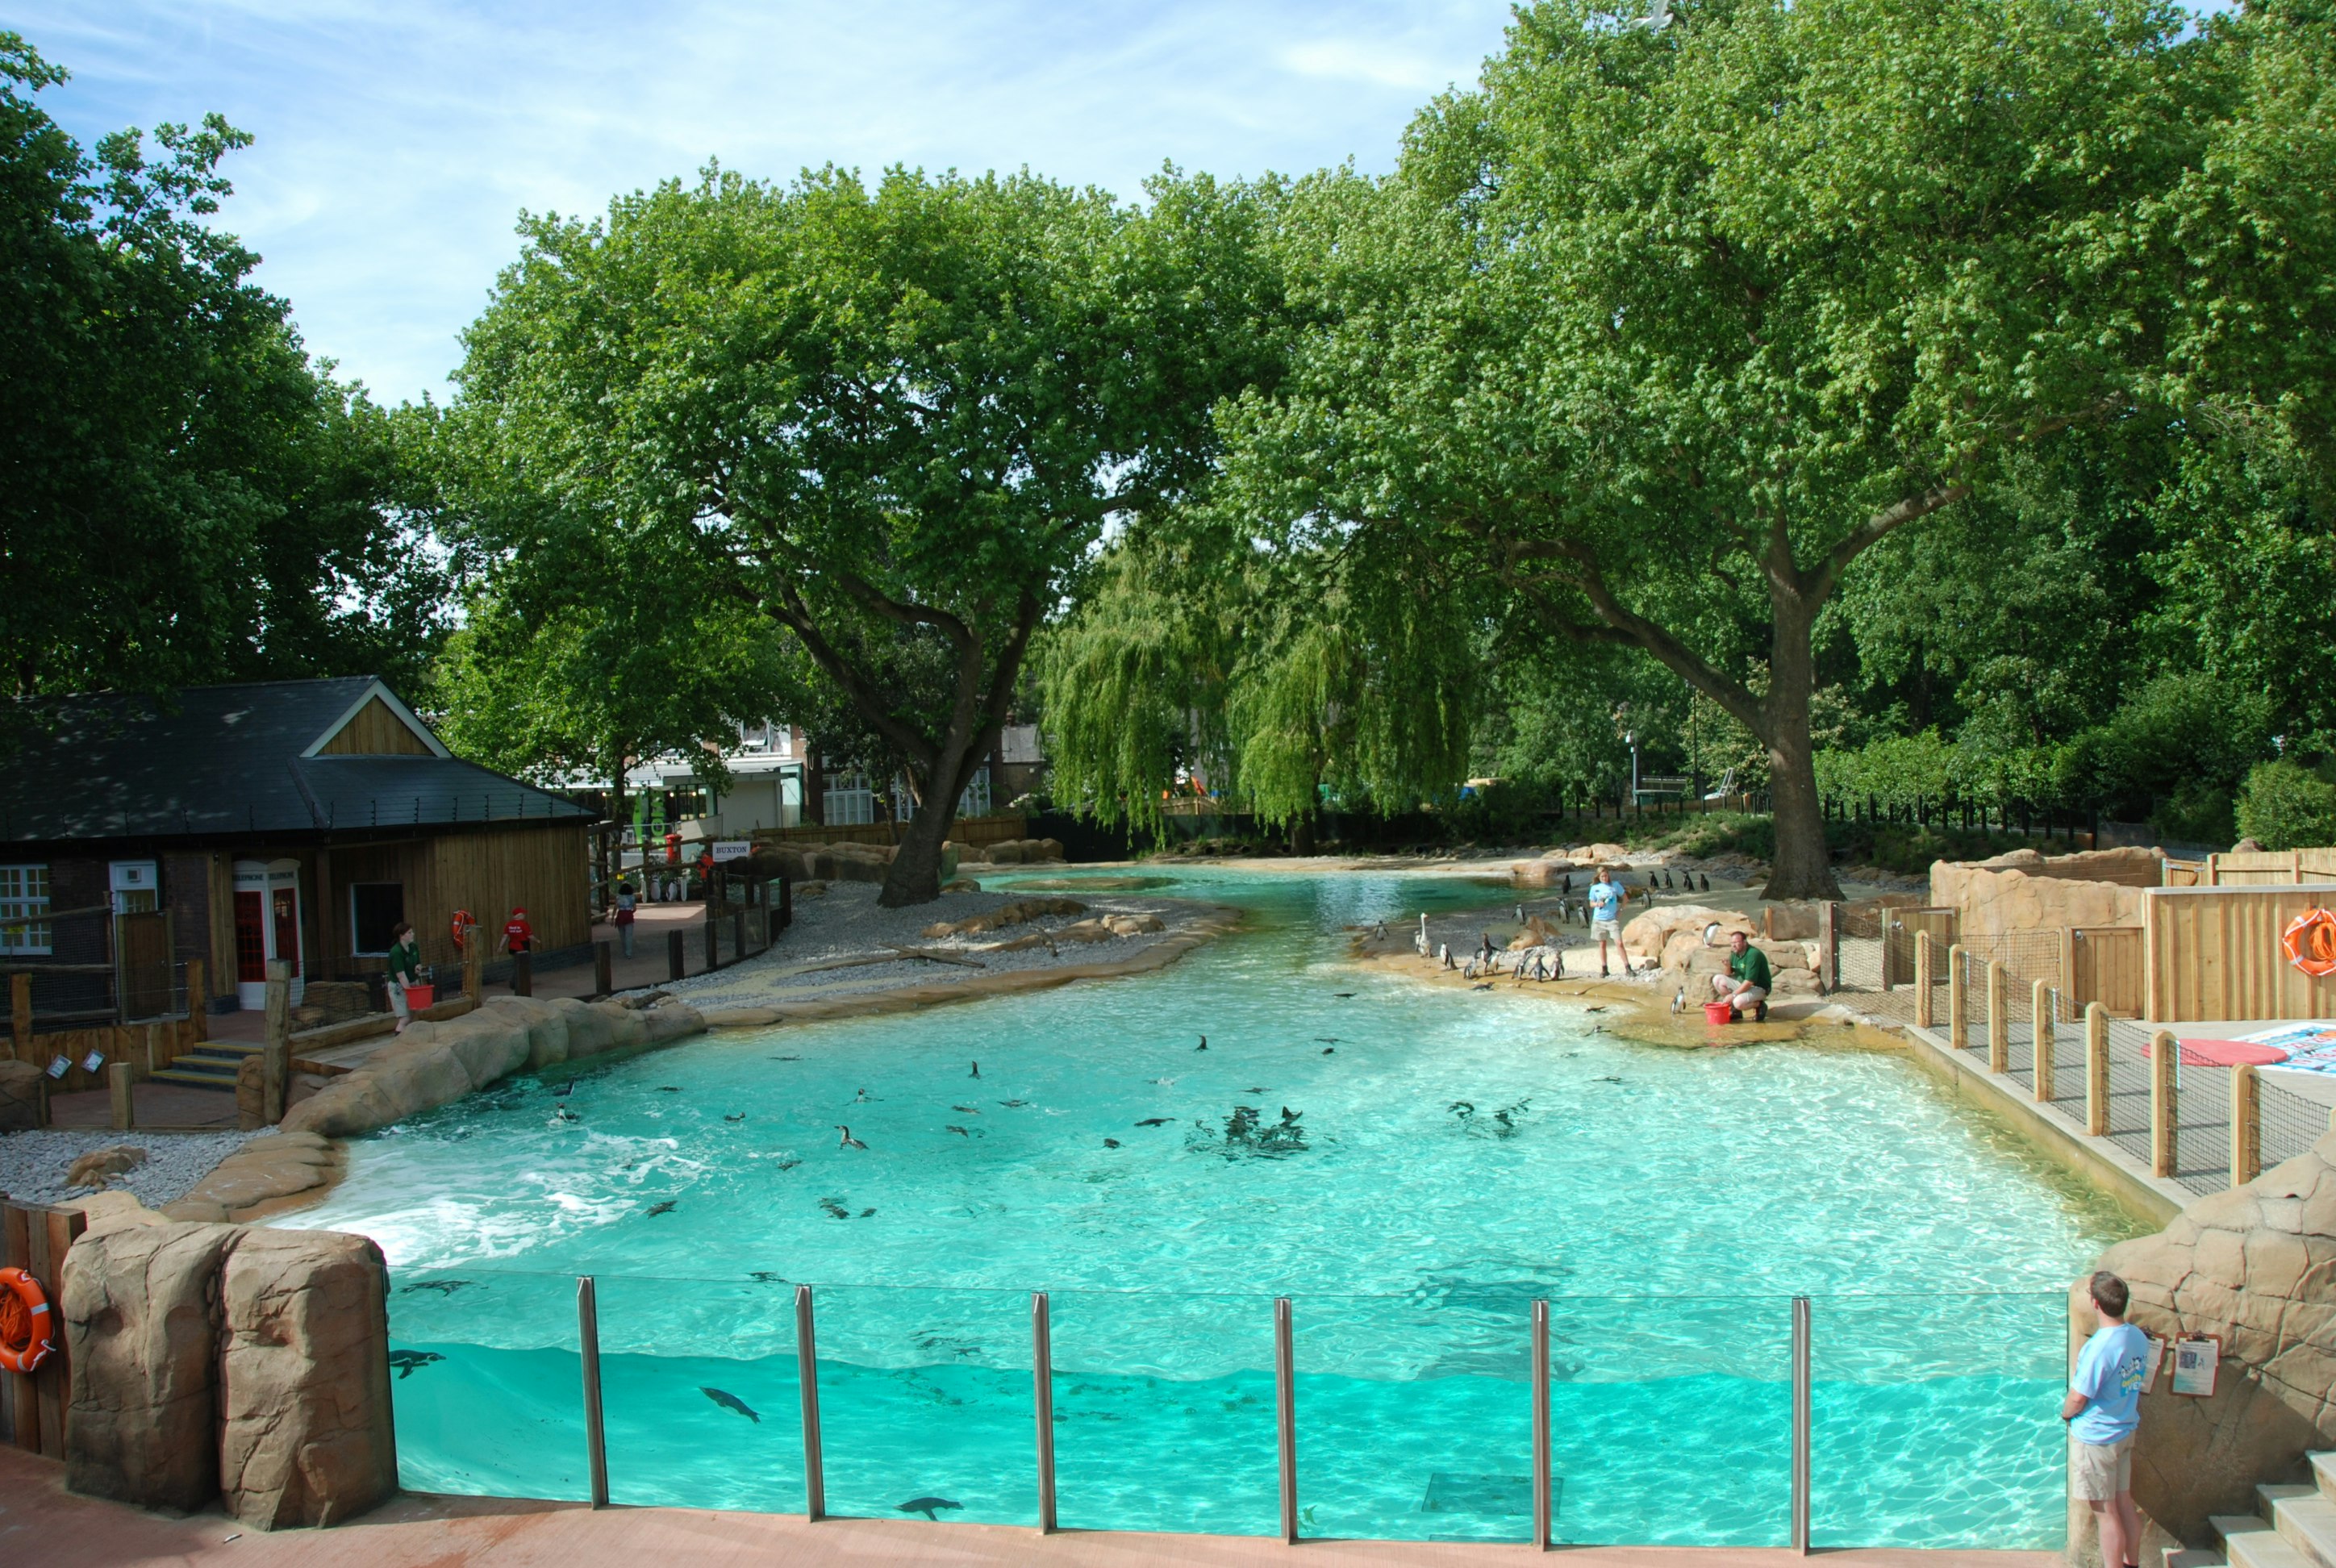 Team Building Activities Venues in London - ZSL London Zoo